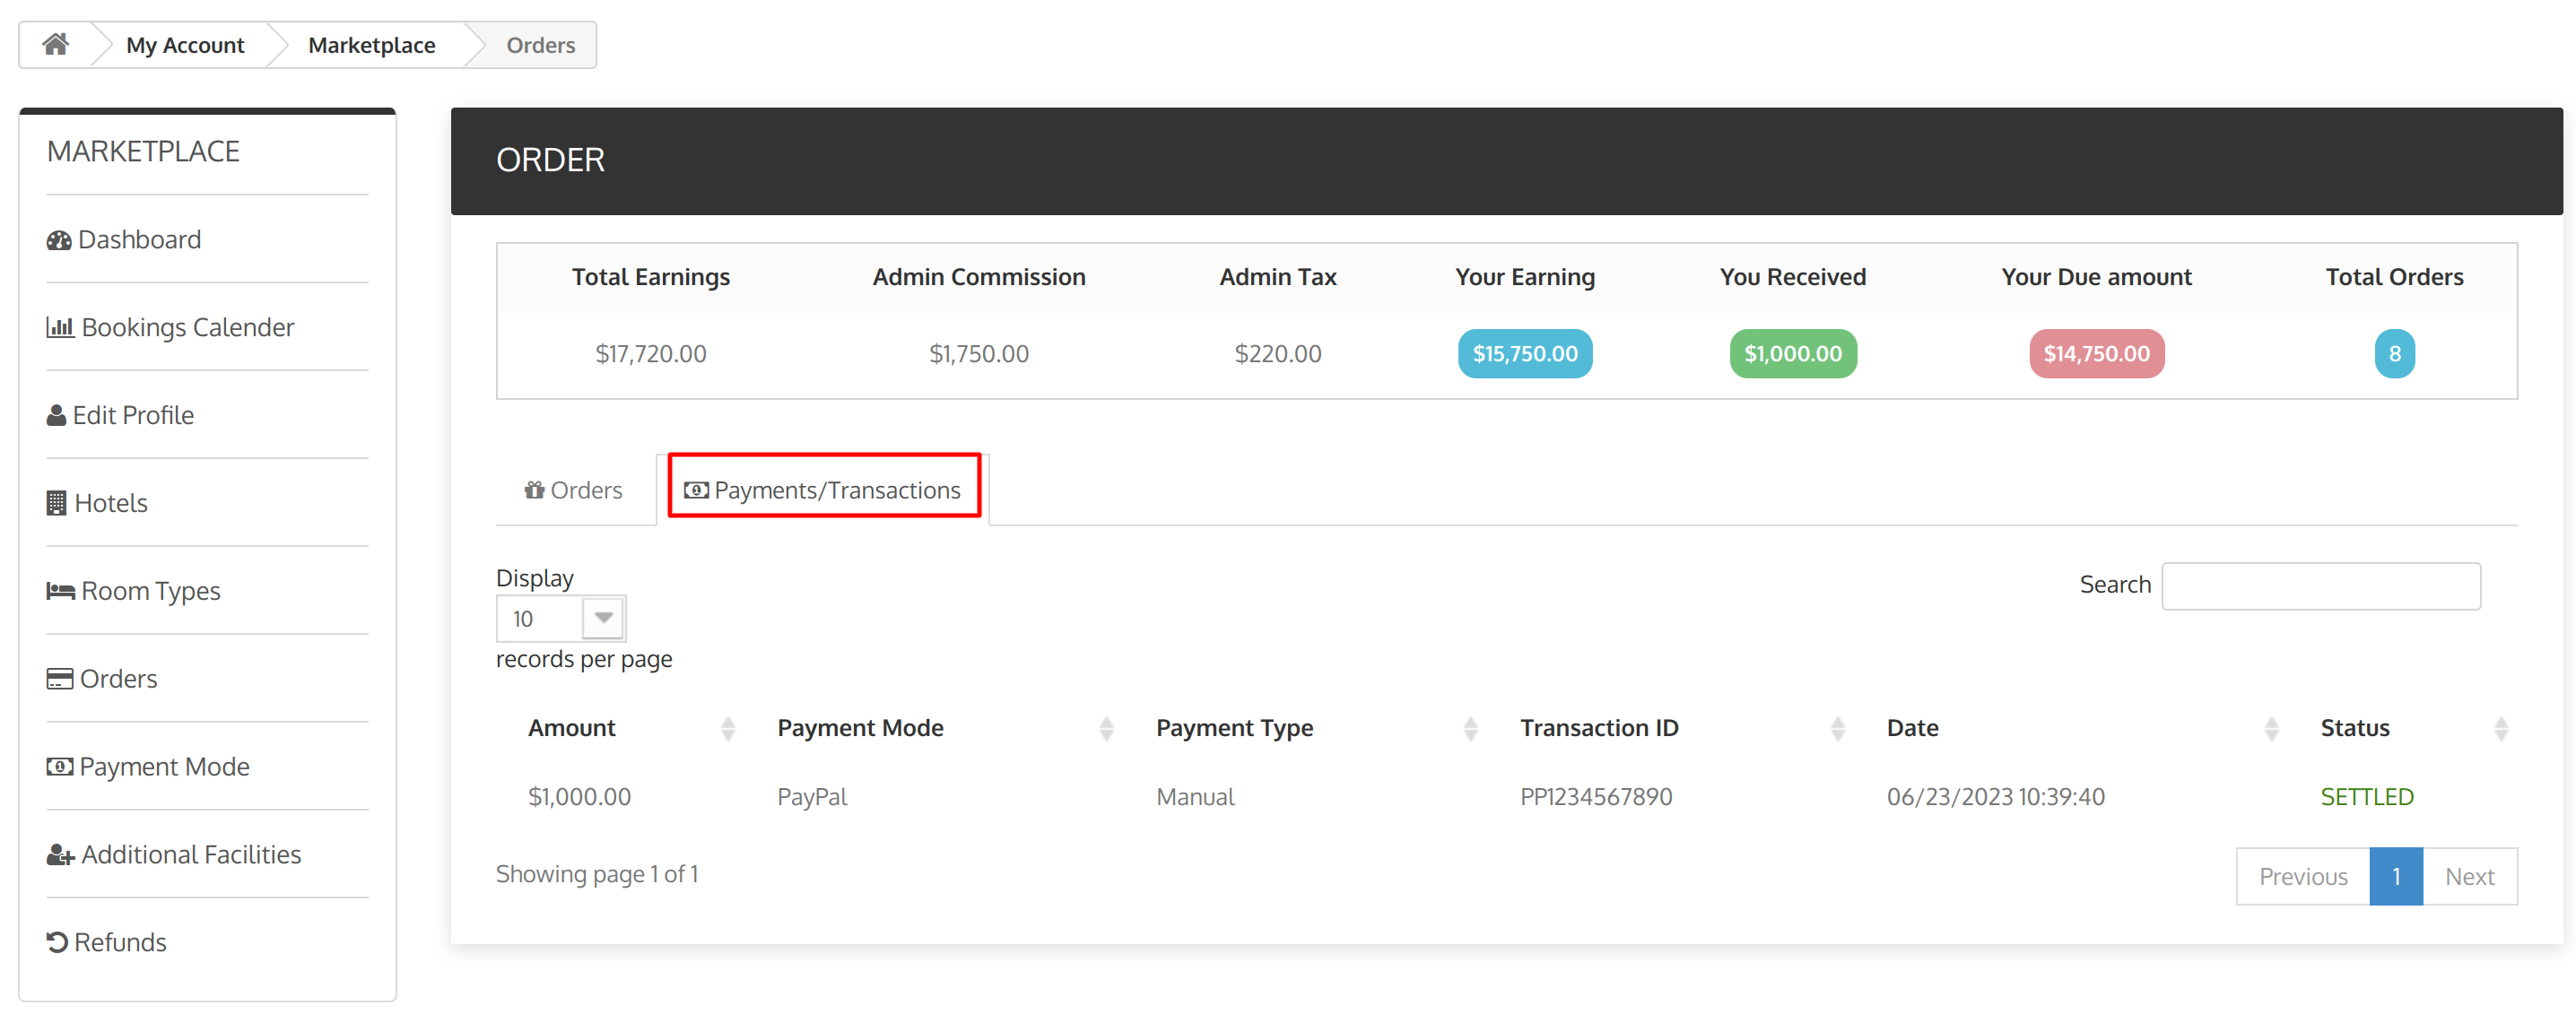 Payments/Transactions section in orders tab of seller portal